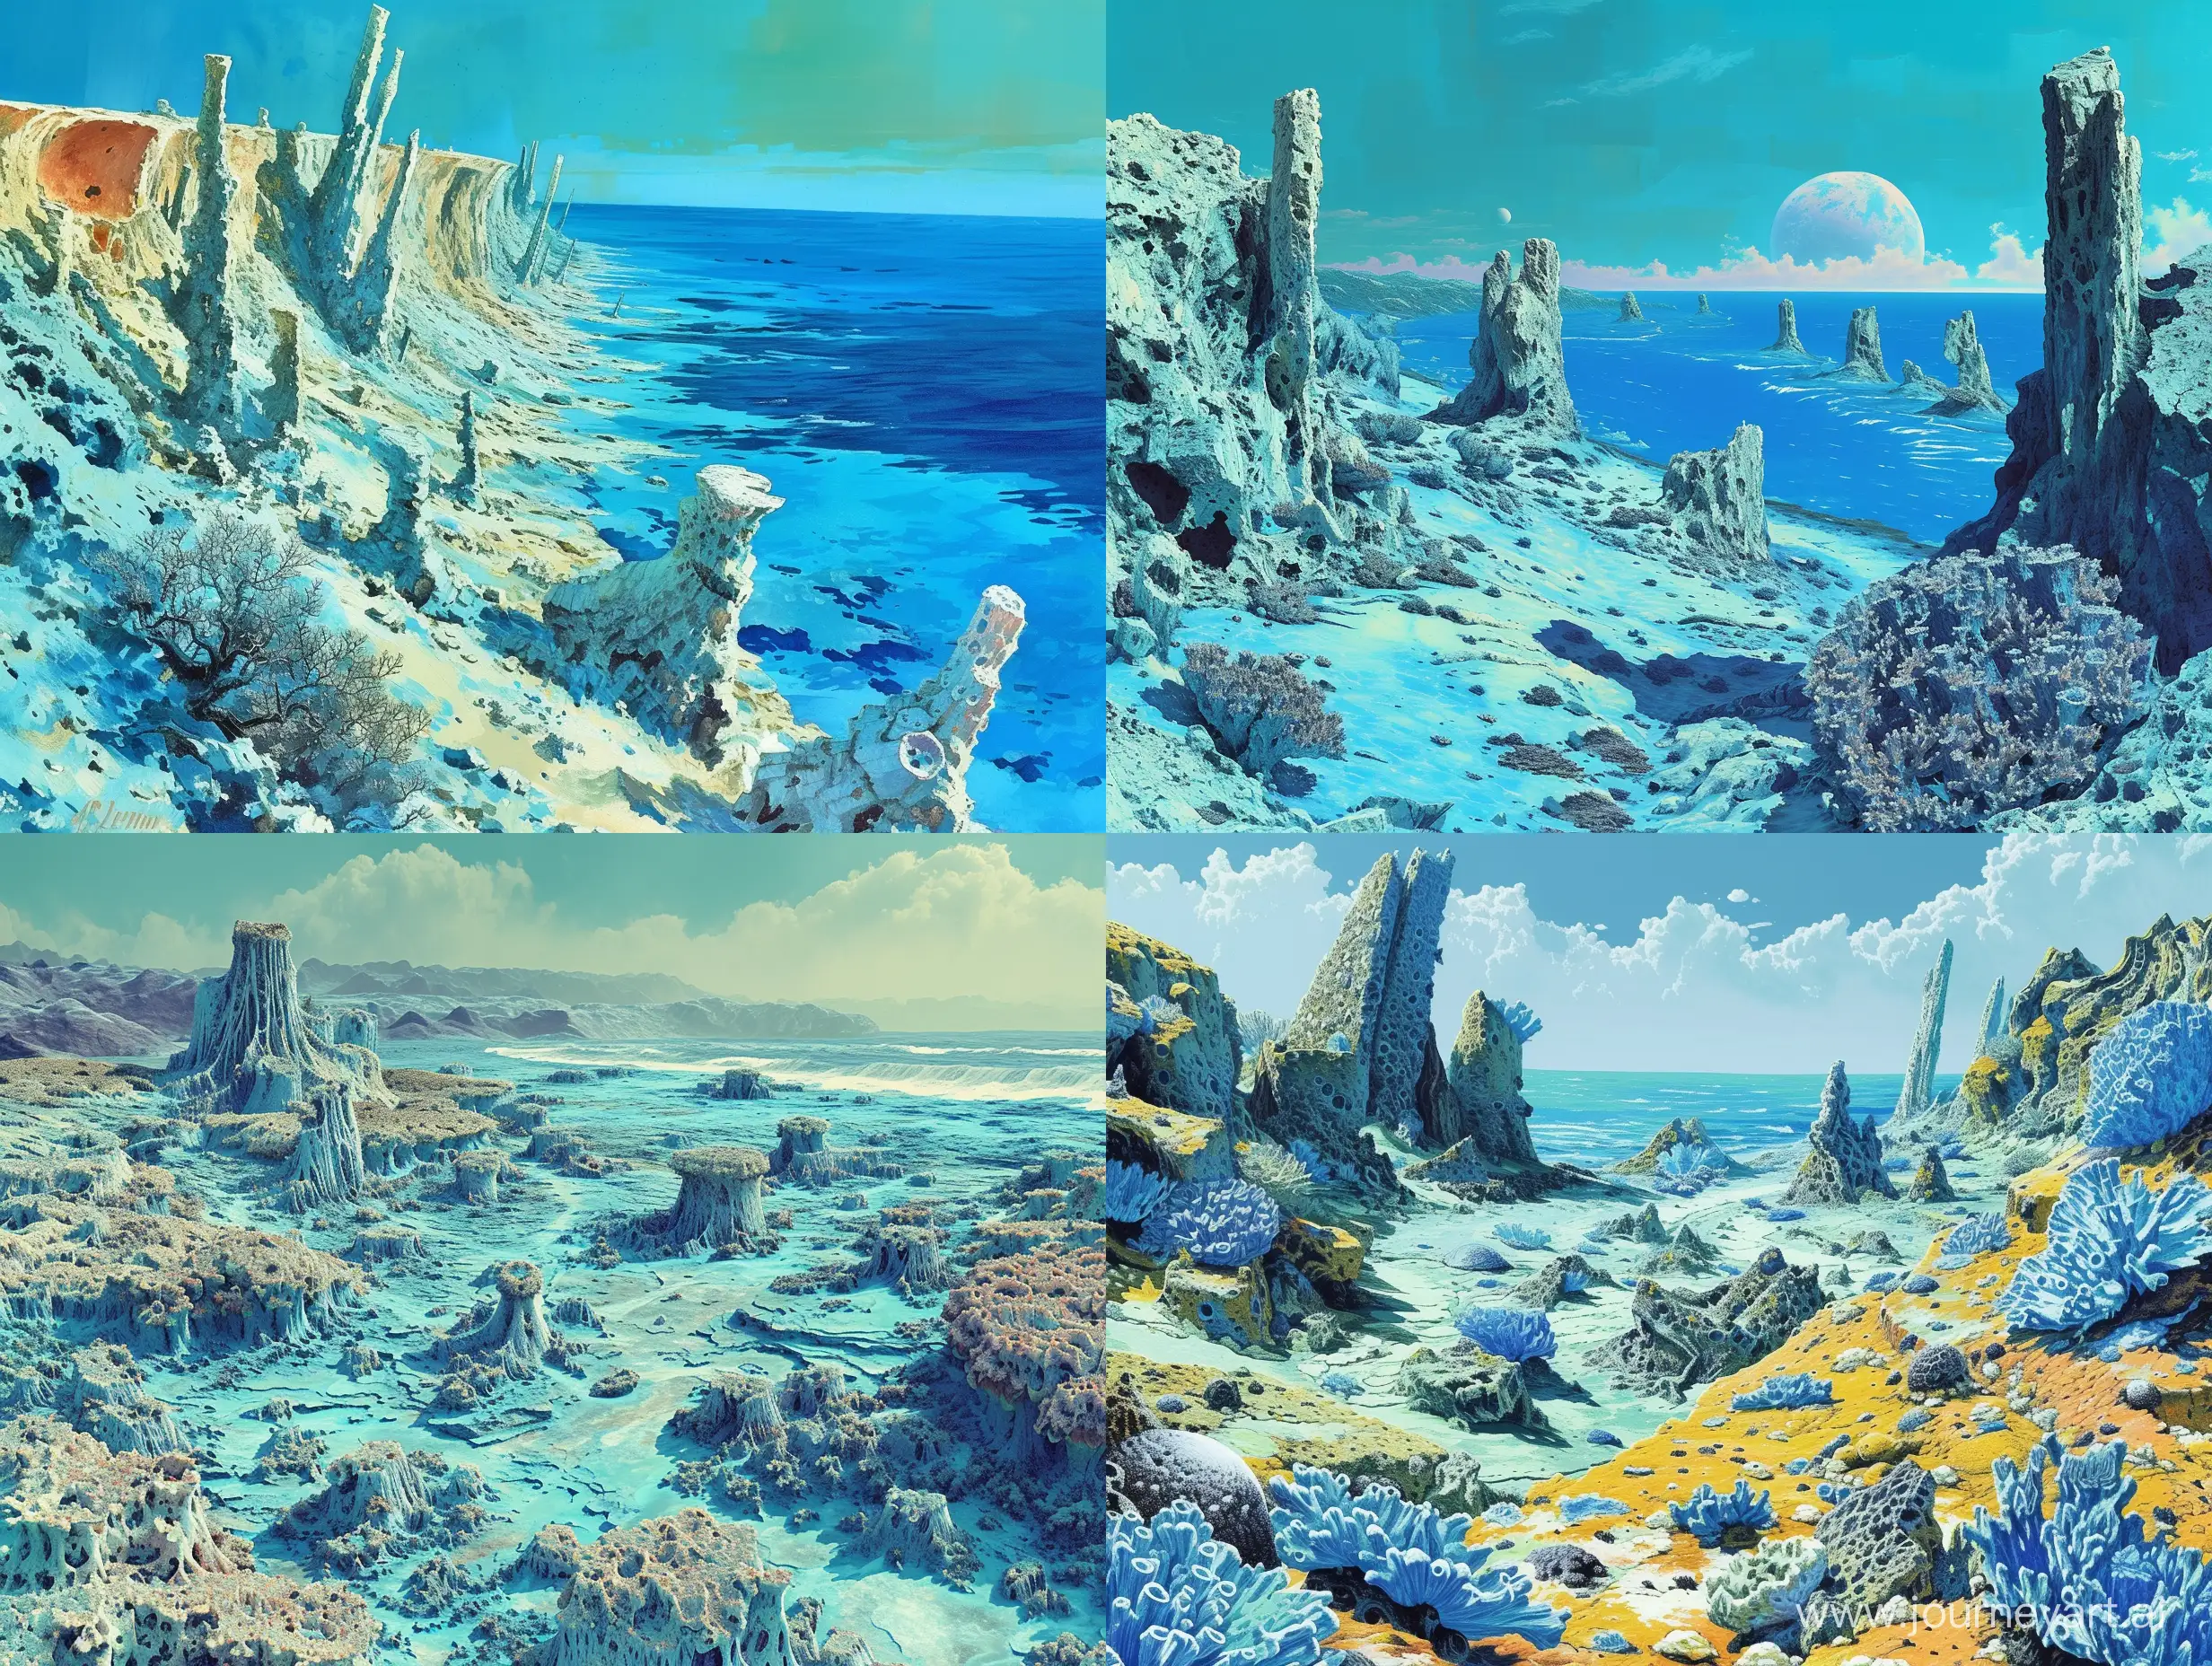 An alien landscape of an ocean coast covered in desiccated coral-like structures . In the style of Roger Dean and Ralph McQuarrie. retro science fiction art style. colorful with a lot of blue. surreal.

